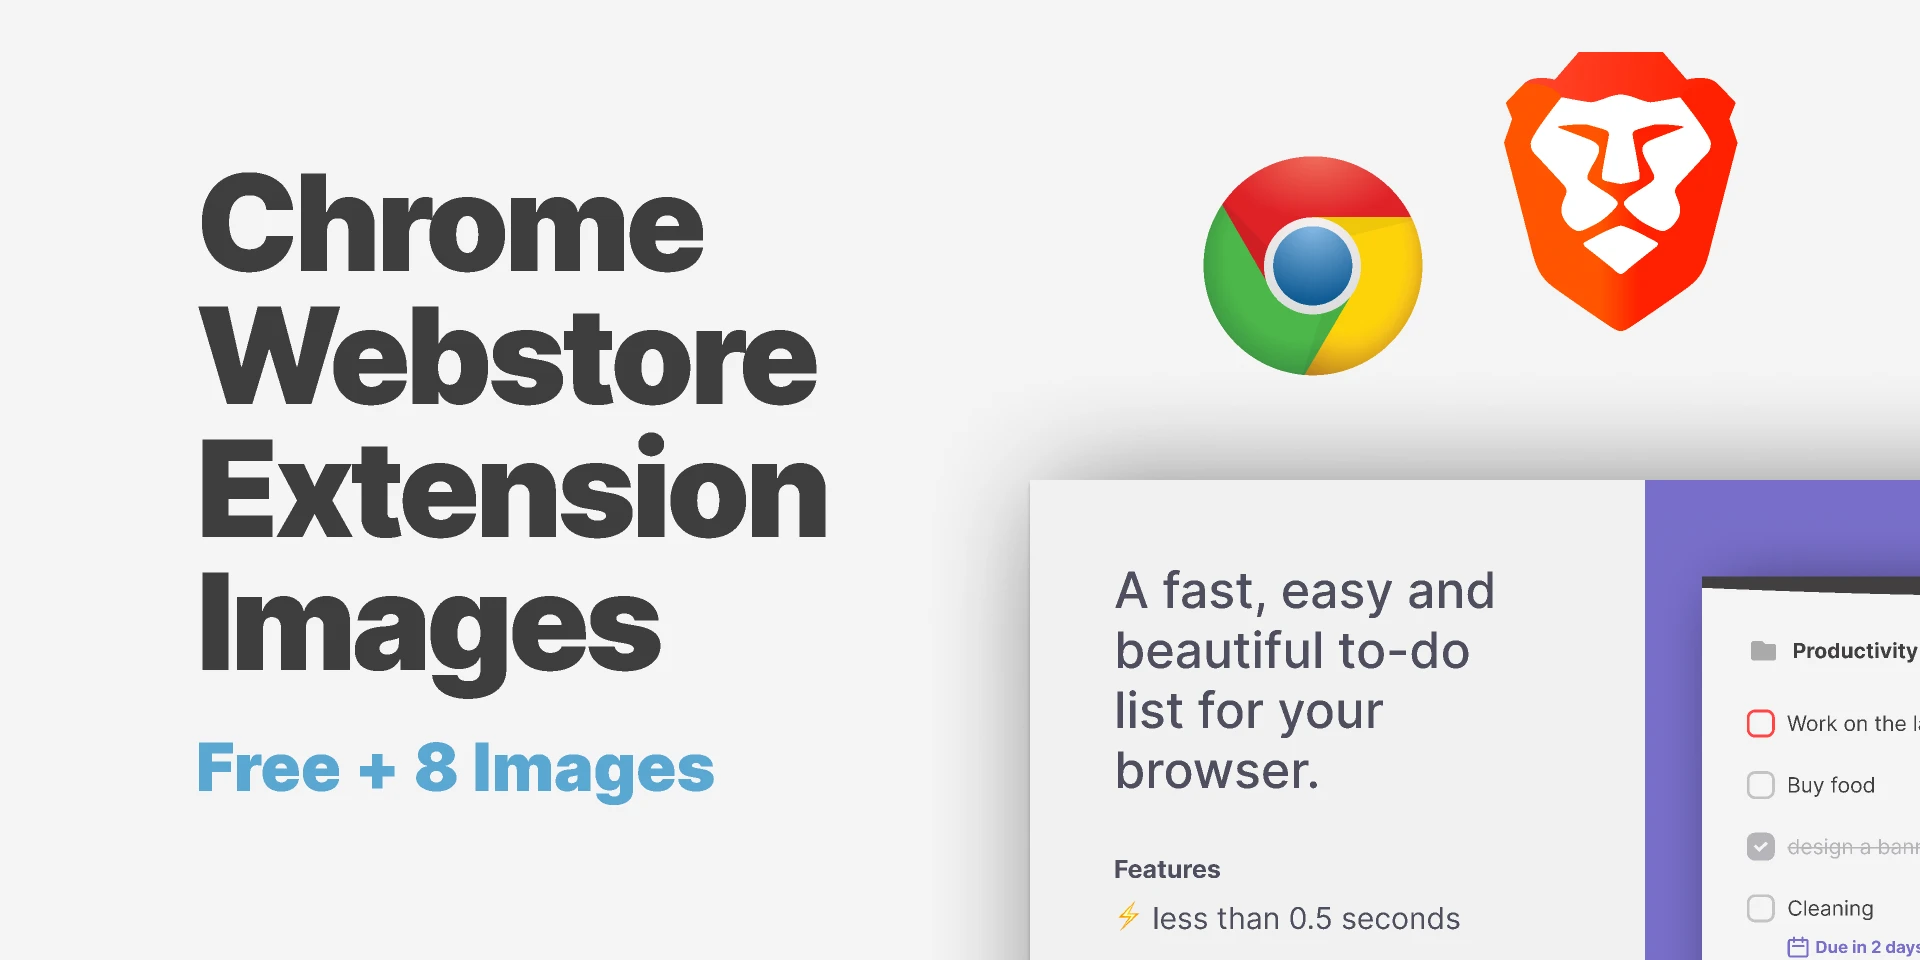 Chrome Webstore Extension Images for Figma and Adobe XD